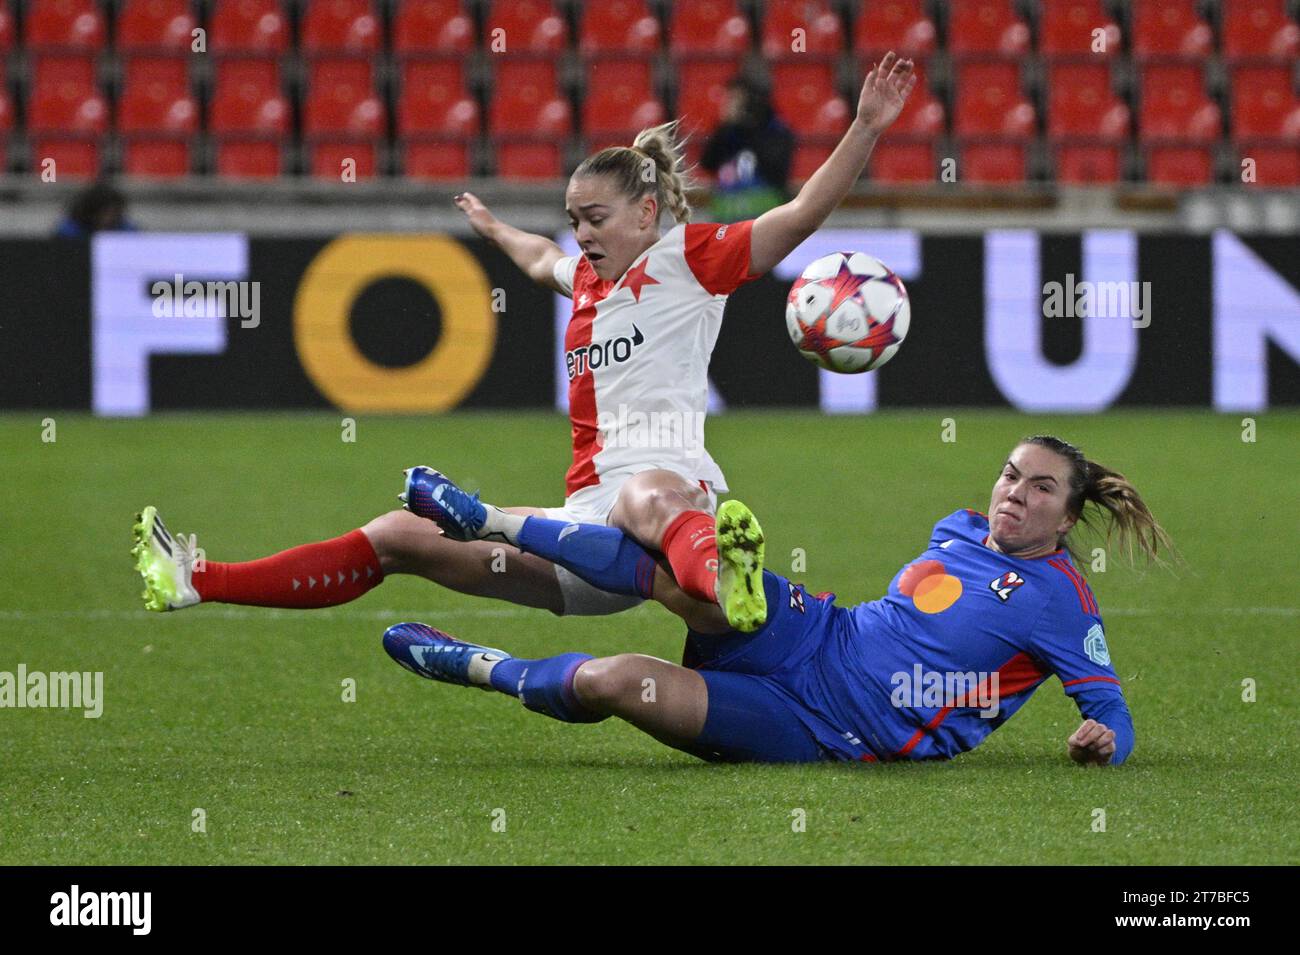 Kristyna Ruzickova of Slavia Praha challenges for the ball with